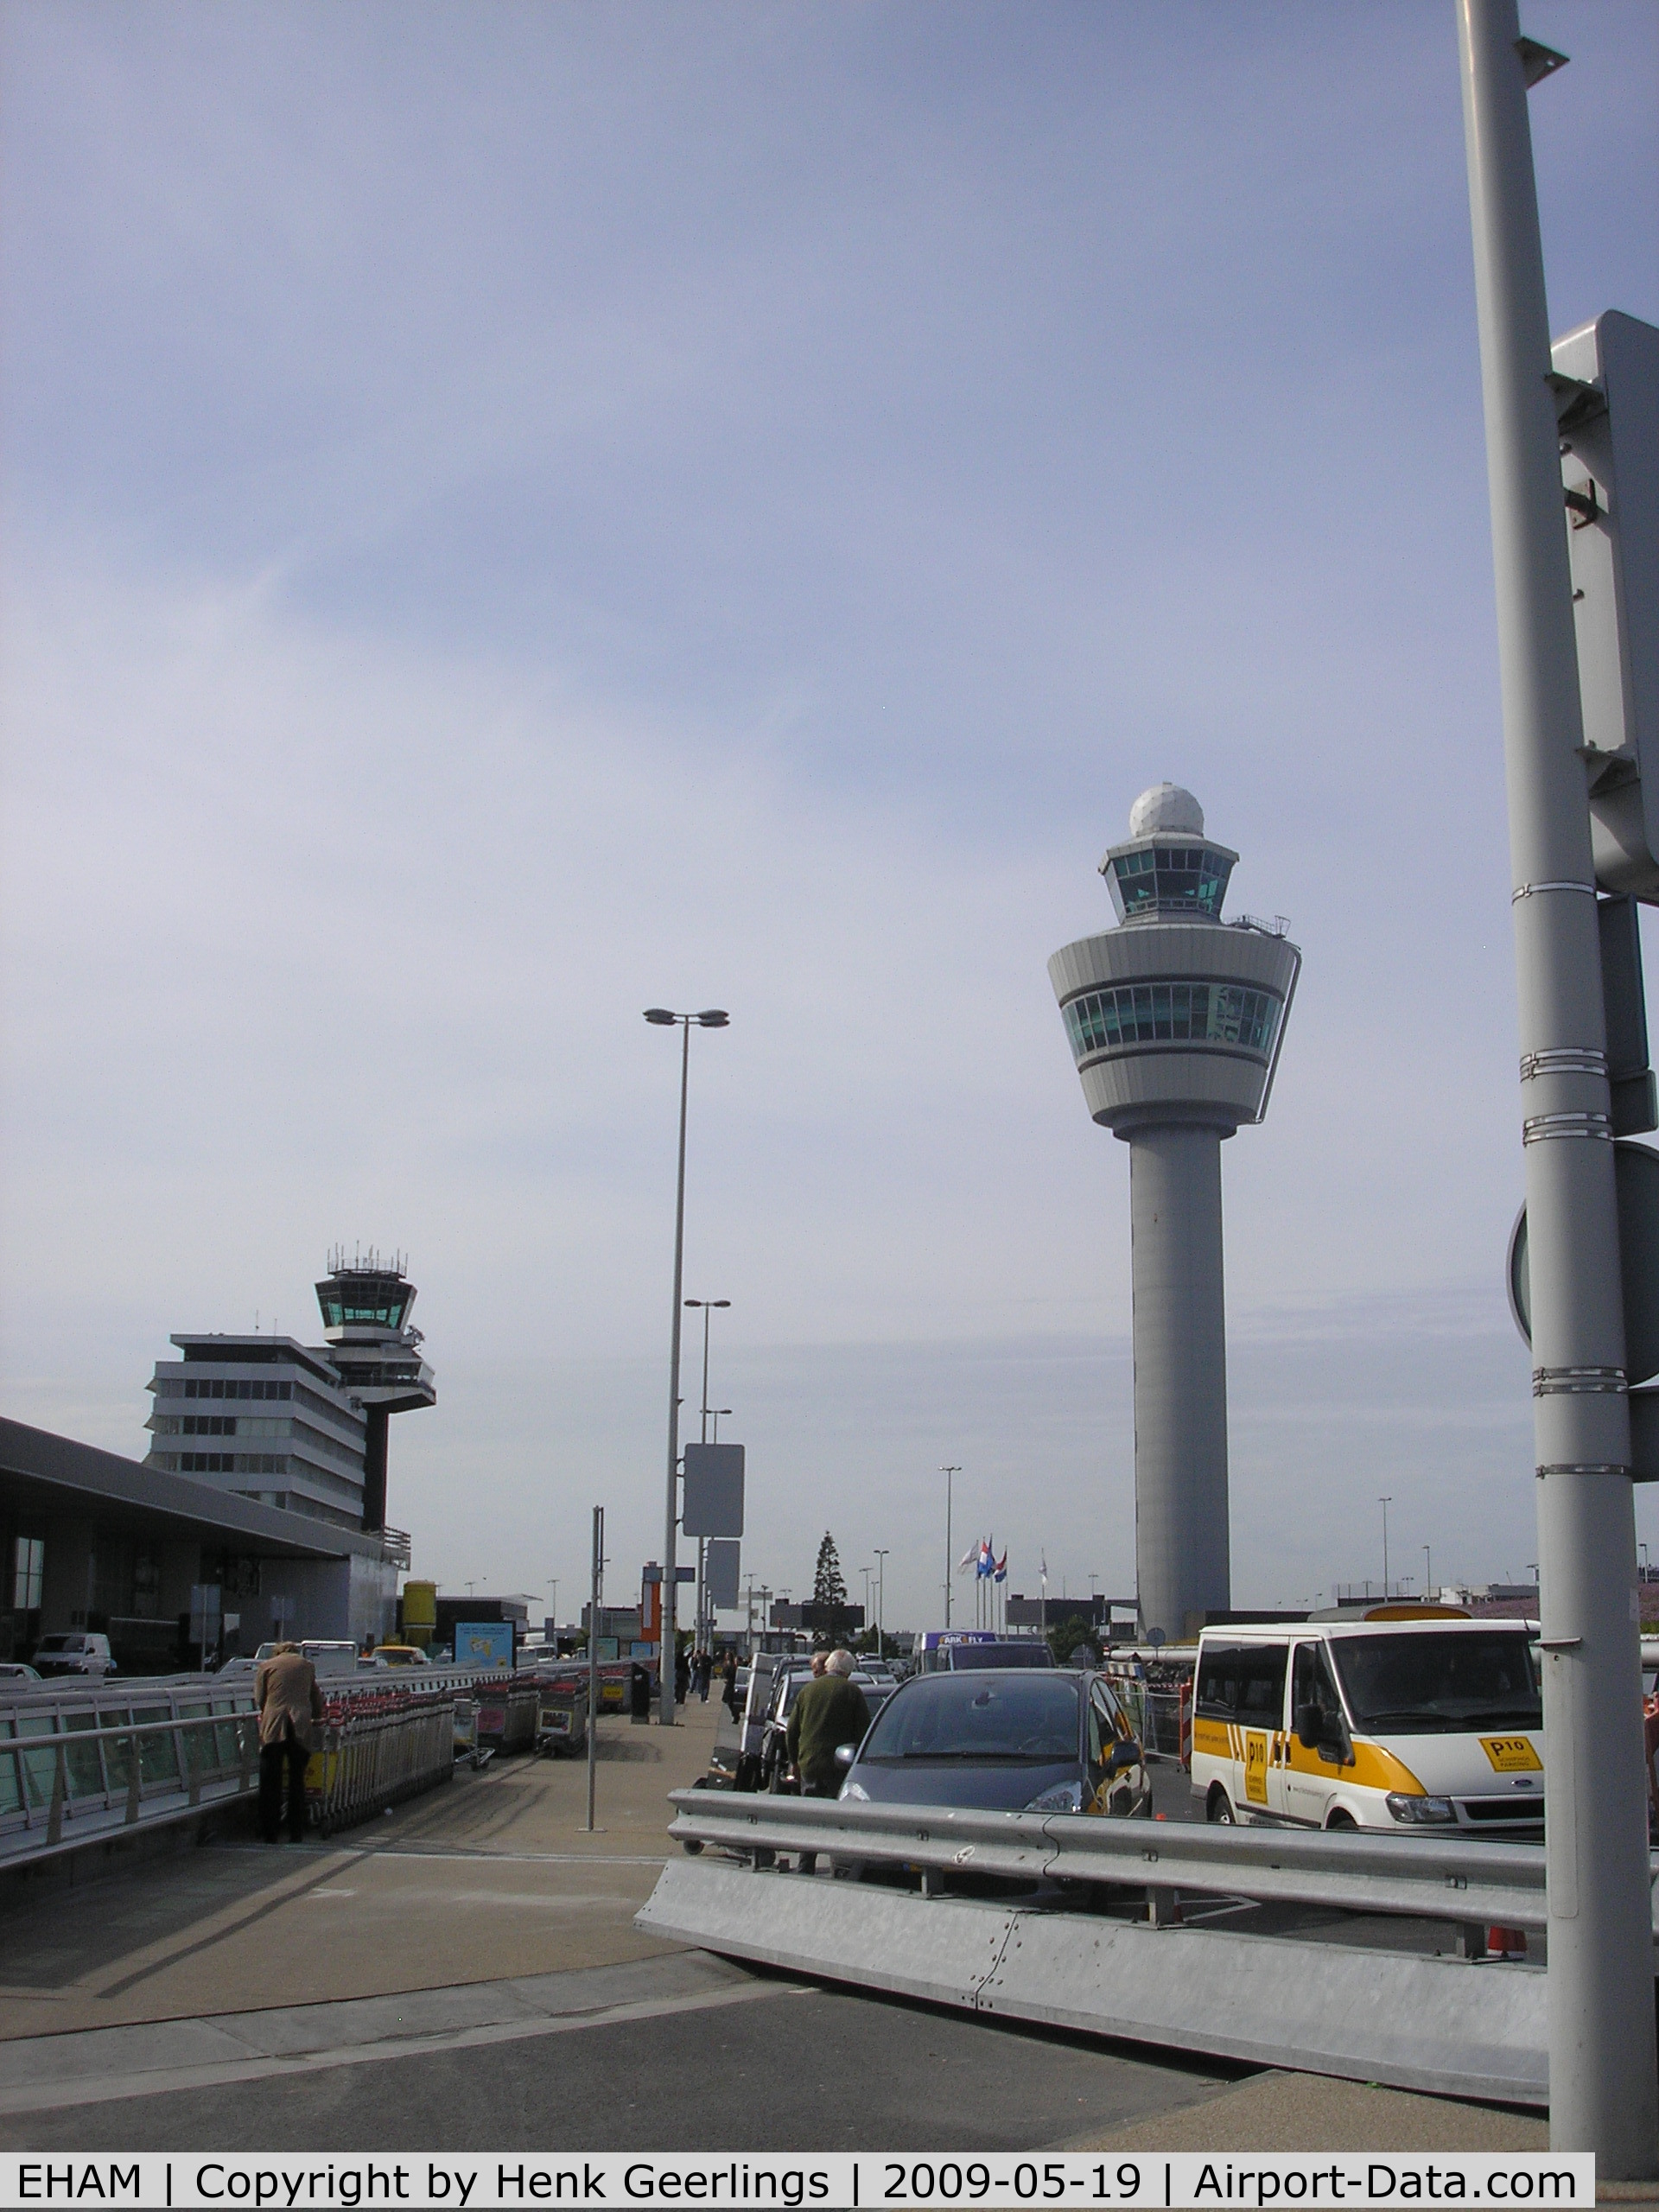 Amsterdam Schiphol Airport, Haarlemmermeer, near Amsterdam Netherlands (EHAM) - Schiphol , Old and New Control Tower